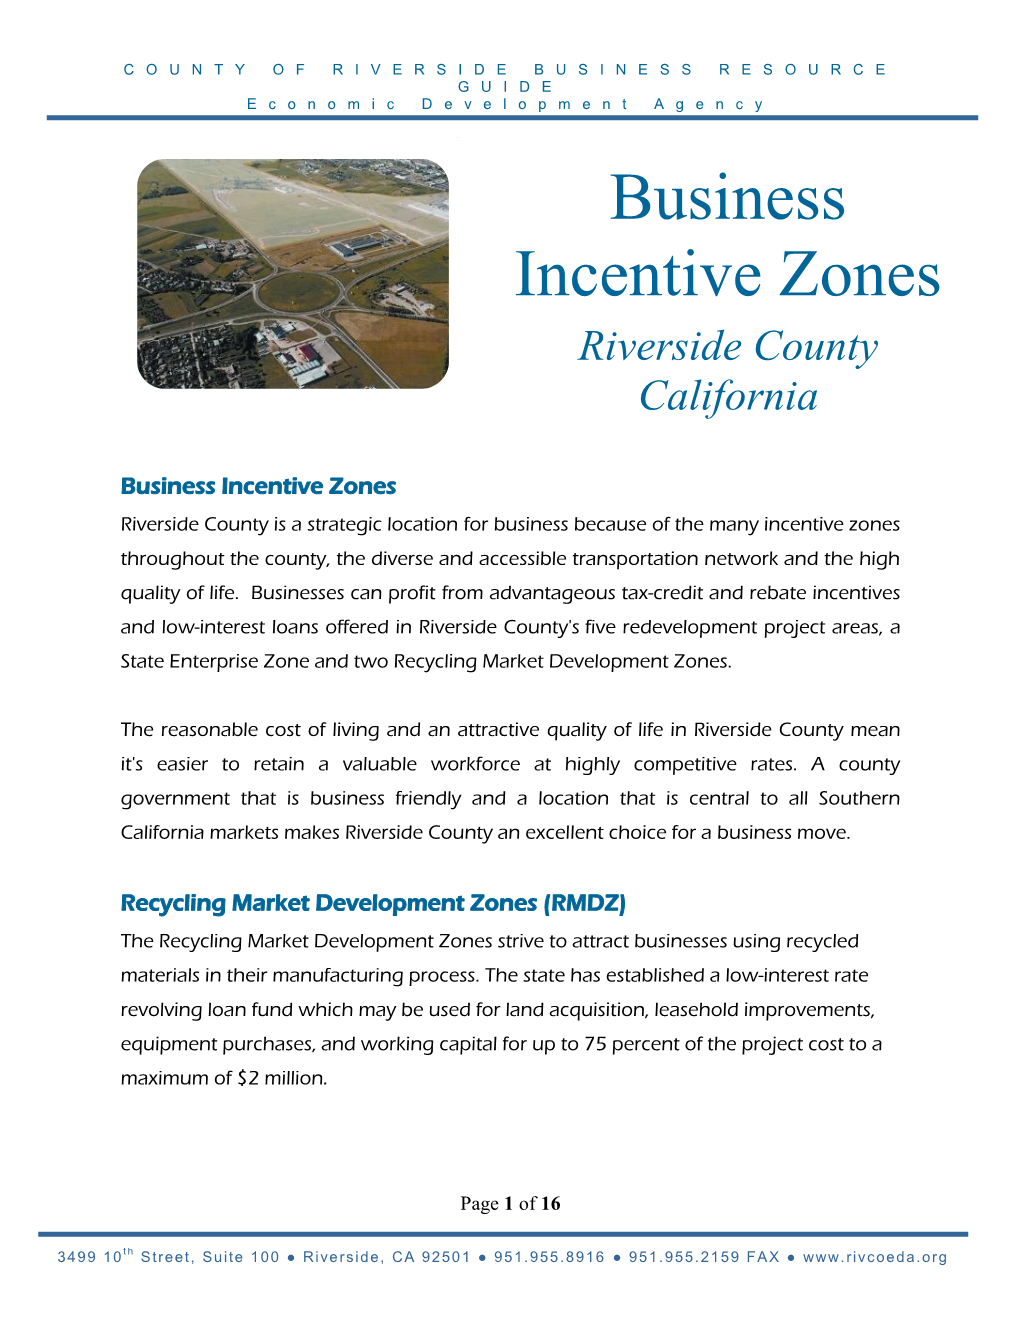 Business Incentive Zones